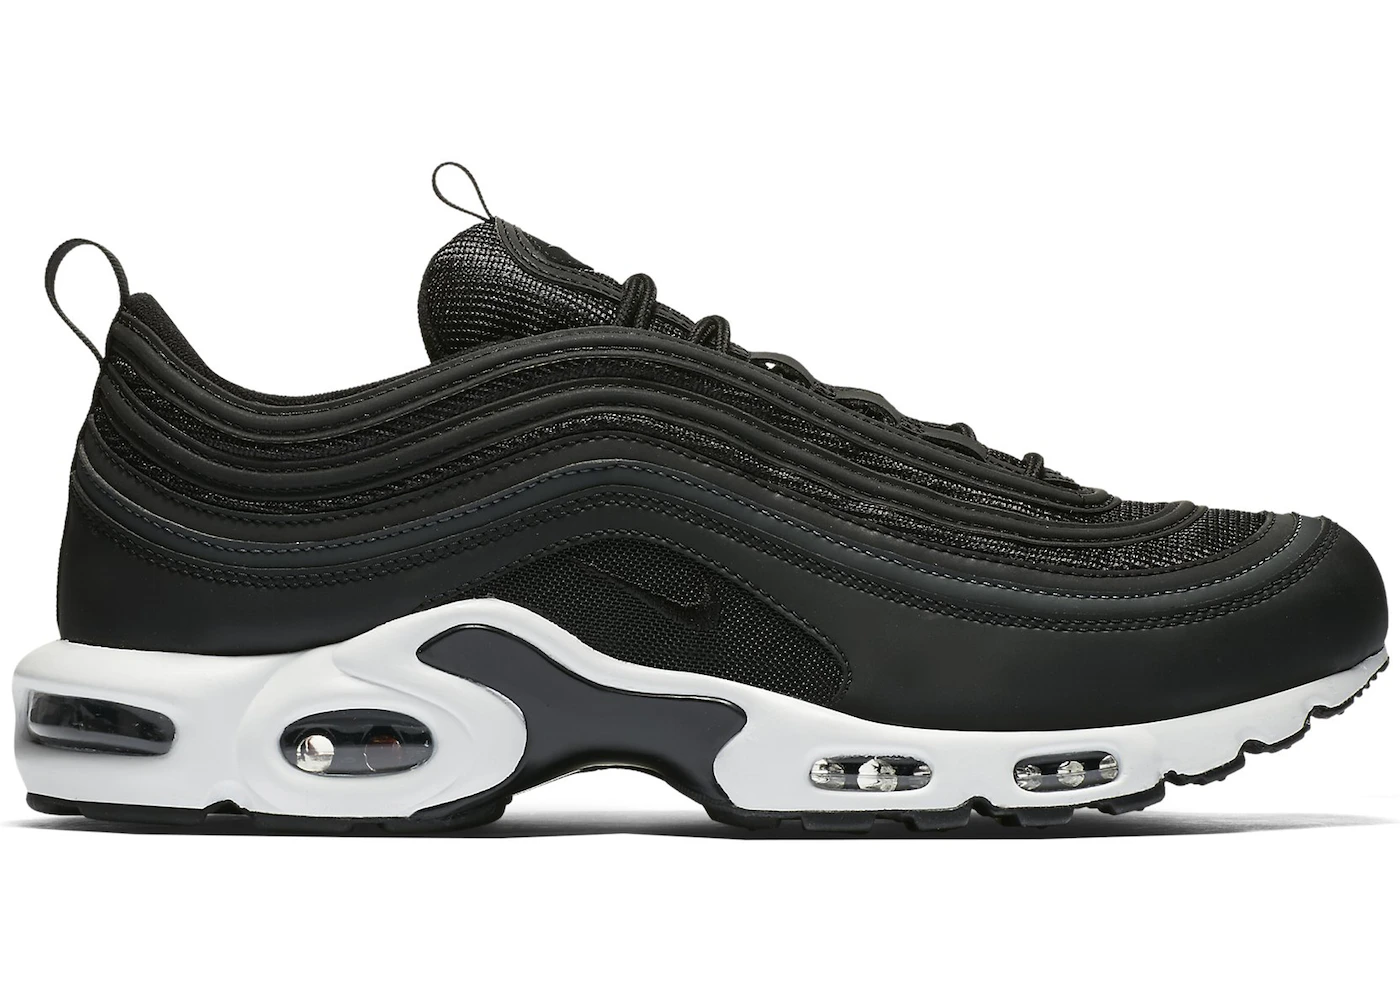 Opposite Simplify comment Nike Air Max Plus 97 Black White - AH8143-001 - US